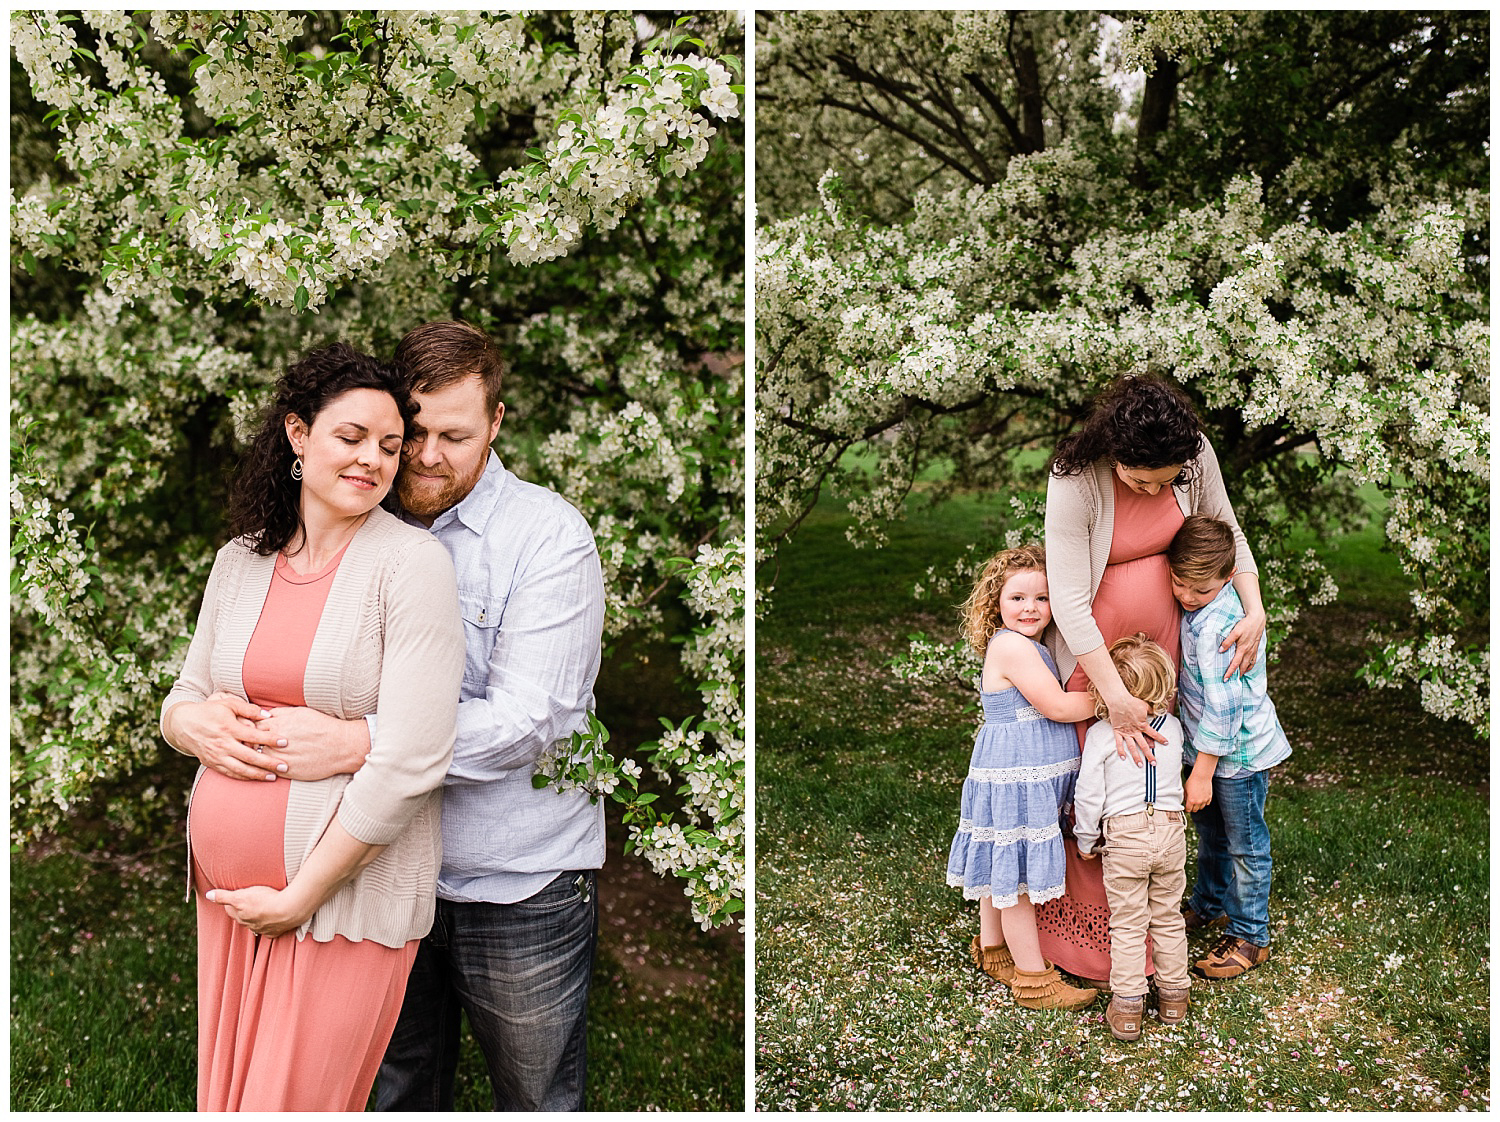  Spring family maternity session under a flowering apple tree, Kansas City maternity photographer, spring maternity session at Loose Park, Rebecca Clair Photography 